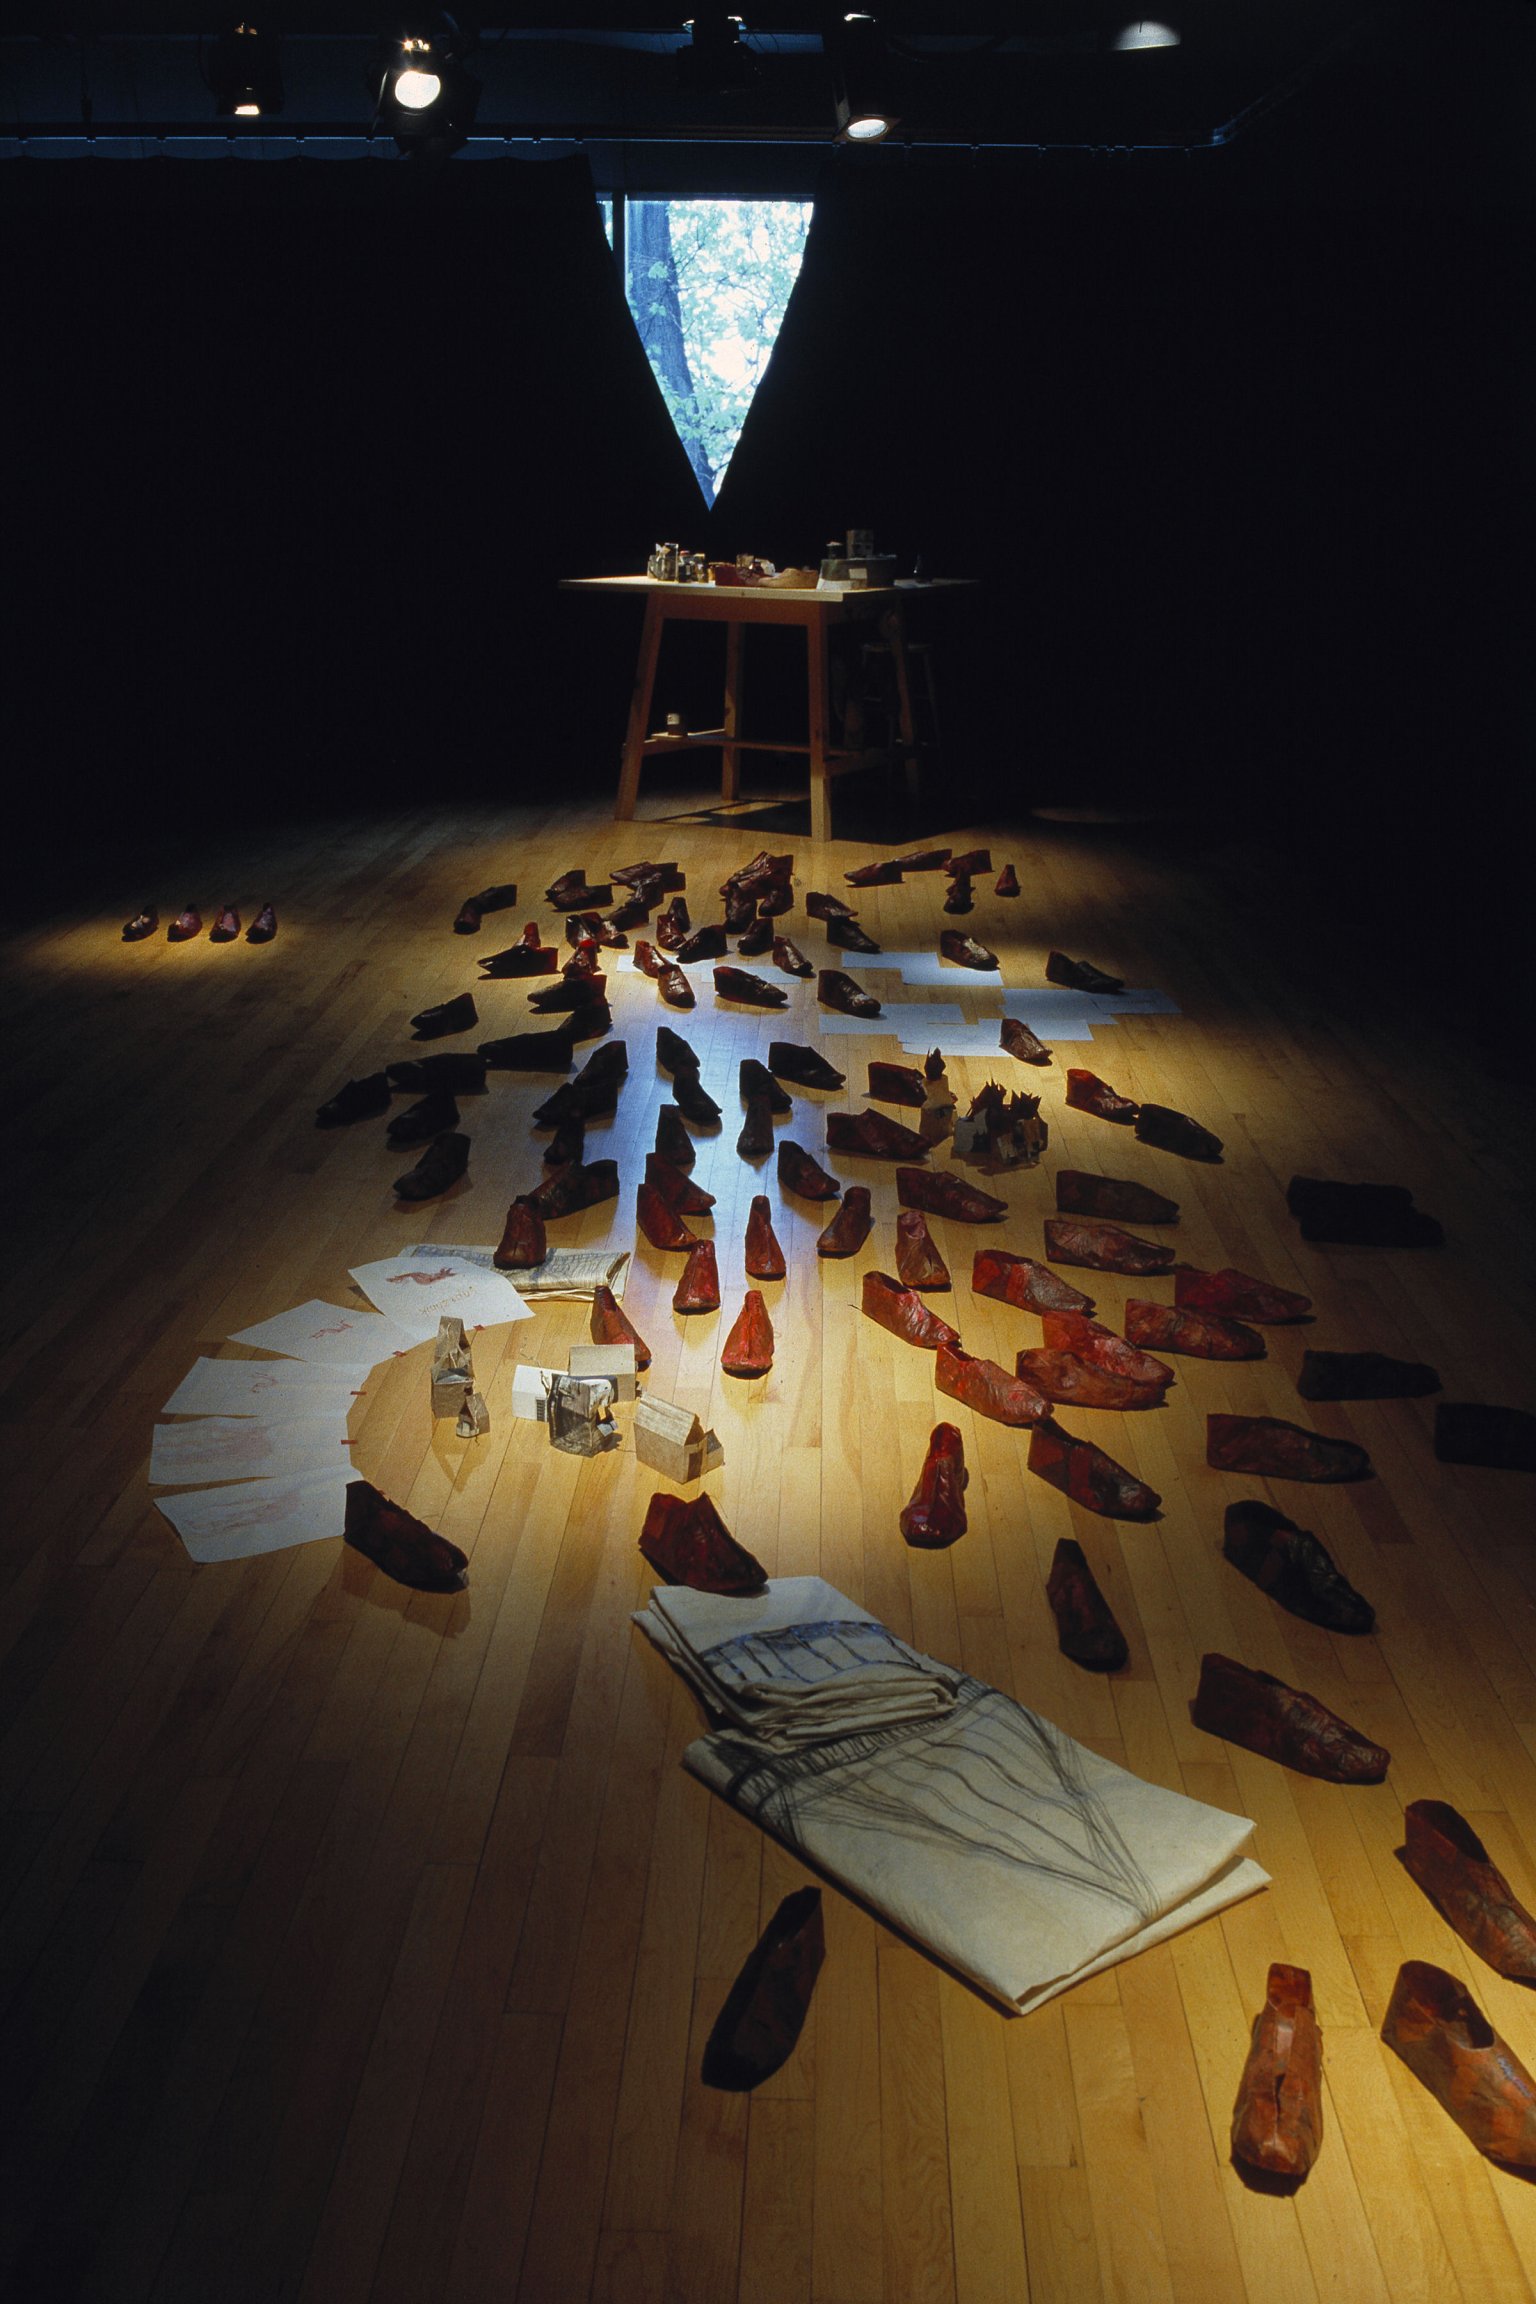 Installation featuring various objects, shoes, and papers on floor. 